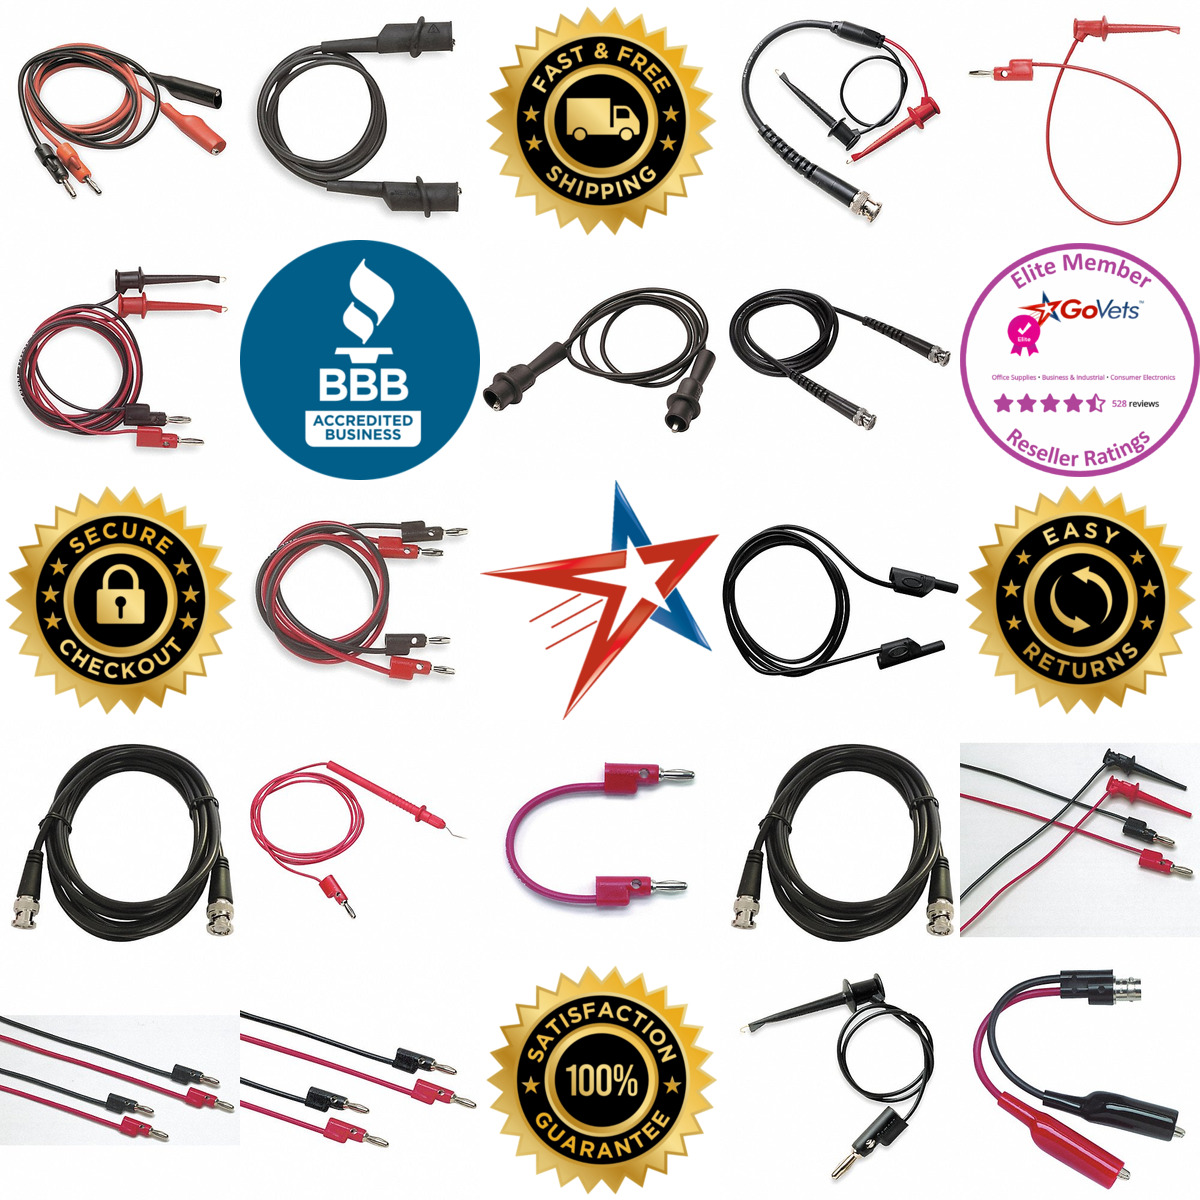 A selection of Patch Cords products on GoVets